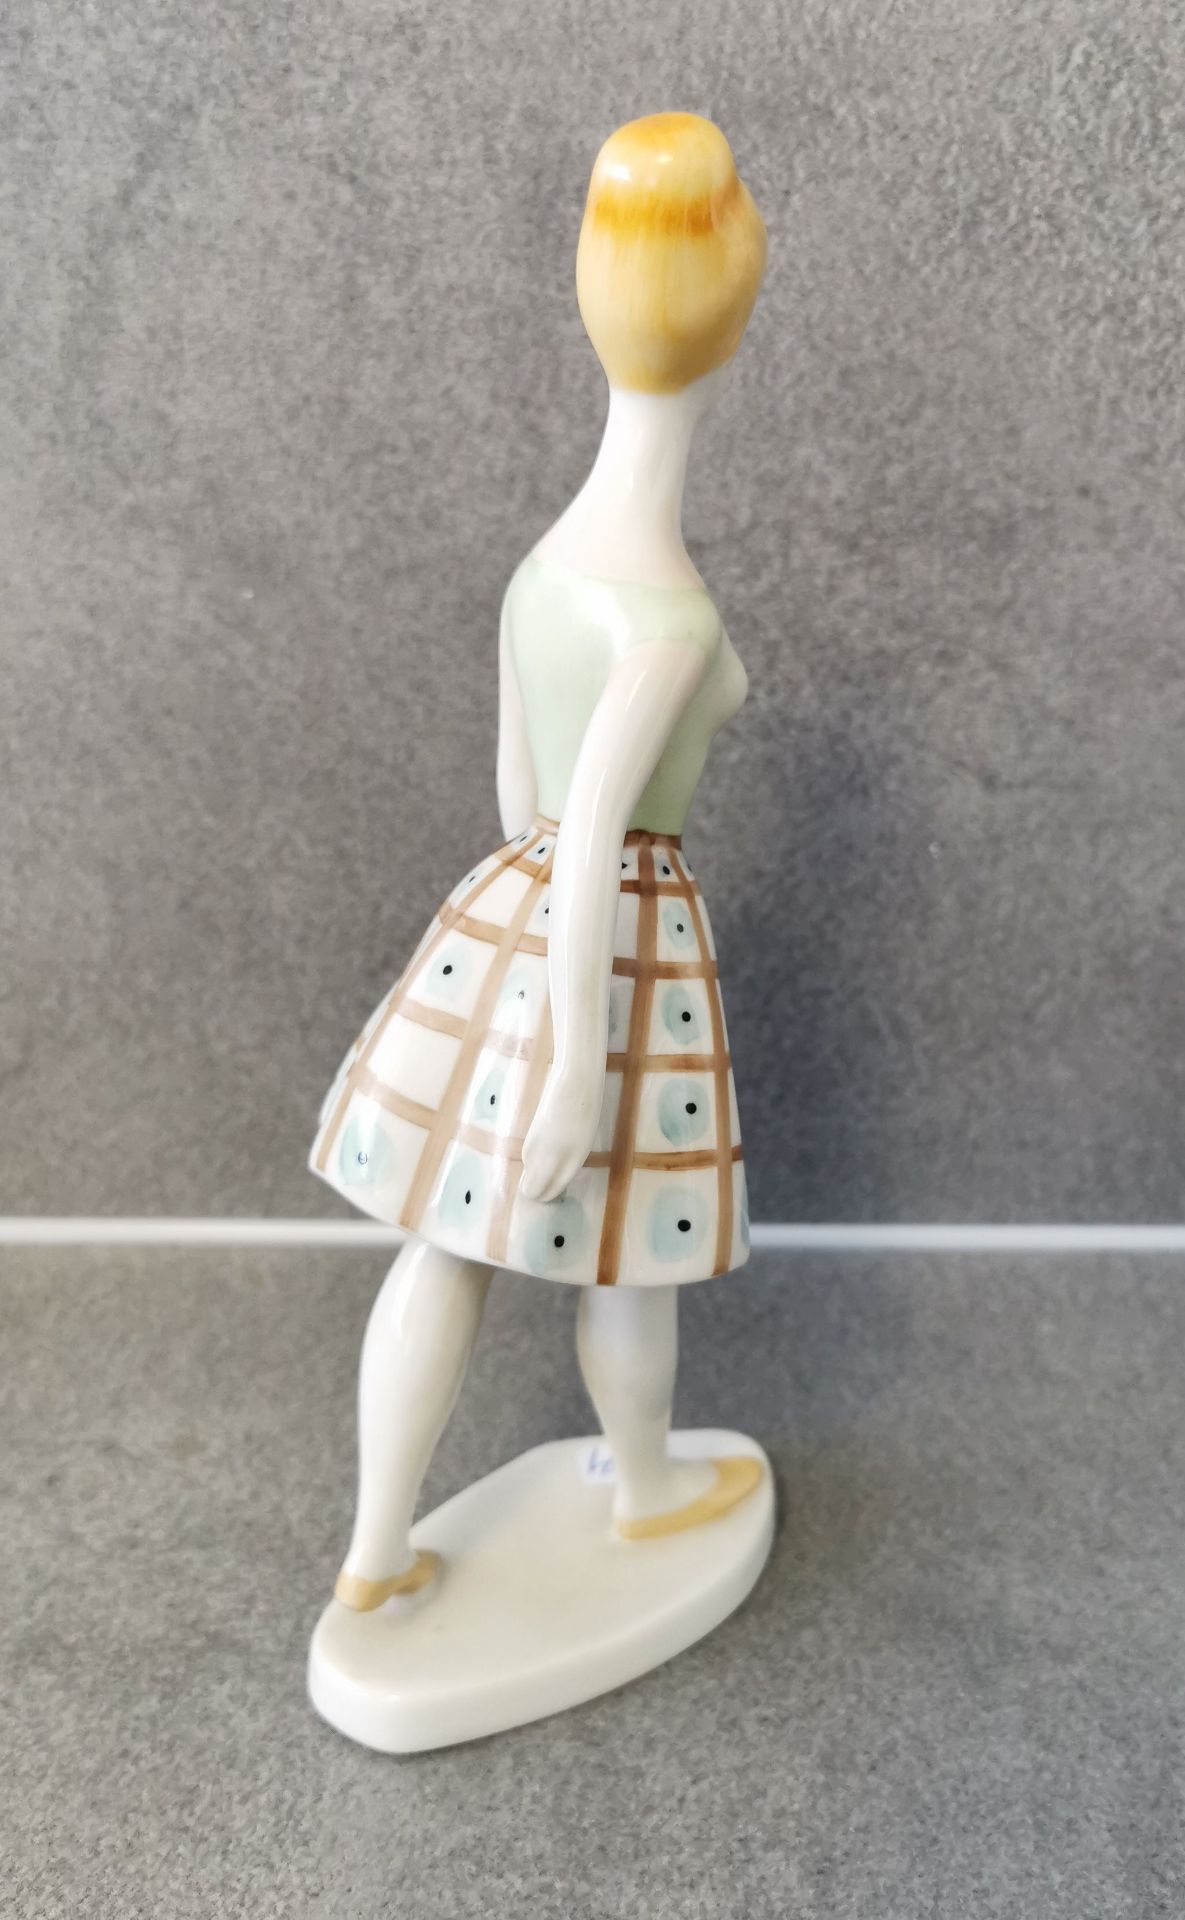 PORCELAIN FIGURE "YOUNG WOMAN" - Image 2 of 3